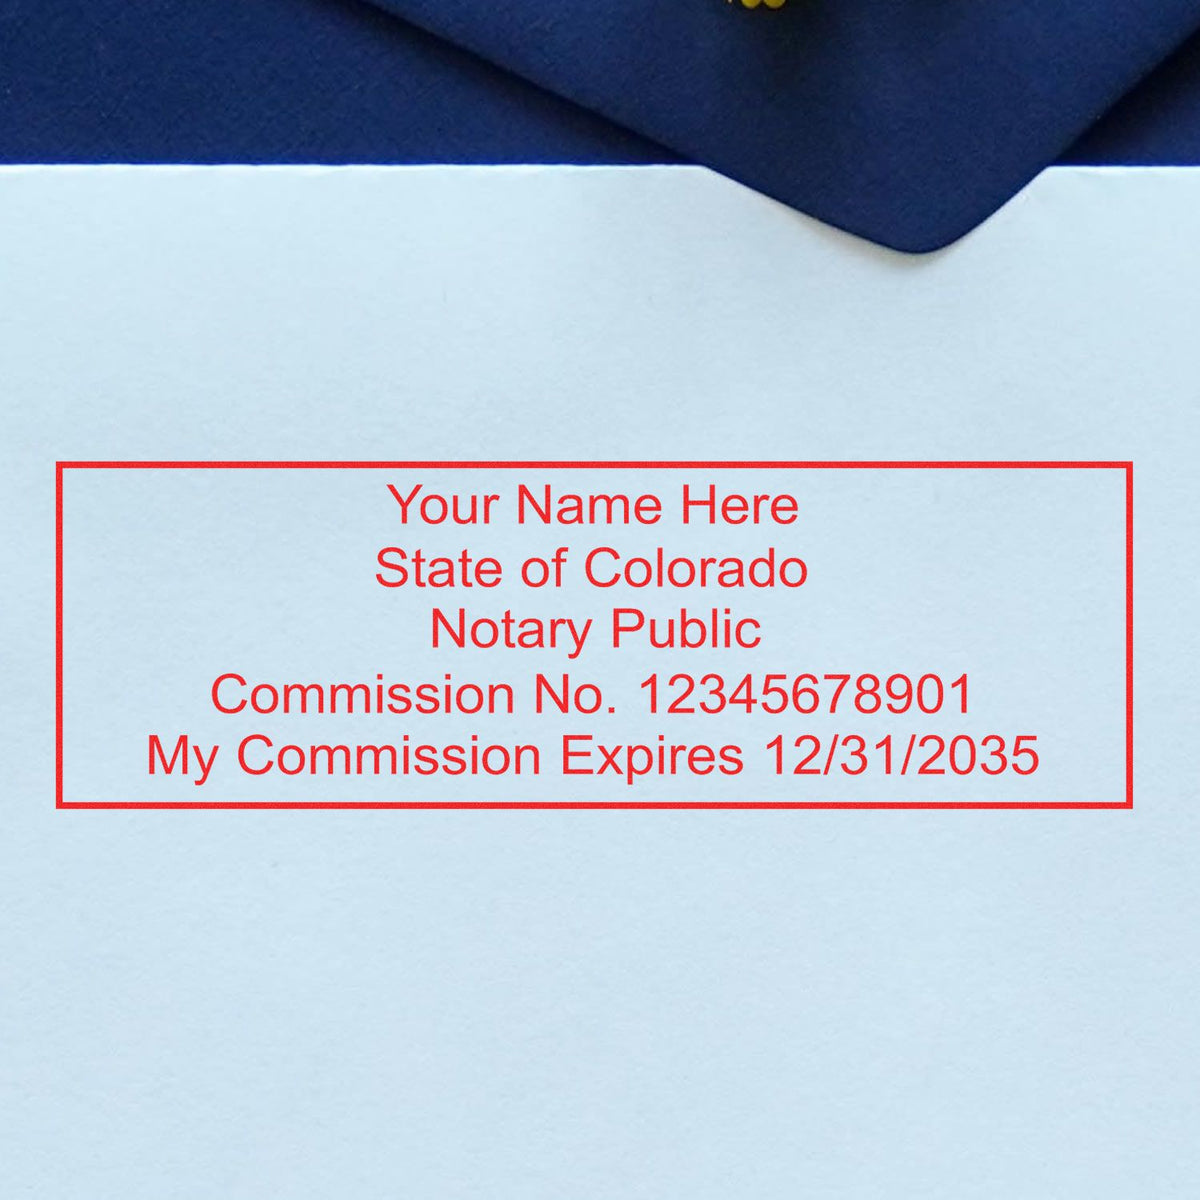 An alternative view of the Slim Pre-Inked Rectangular Notary Stamp for Colorado stamped on a sheet of paper showing the image in use